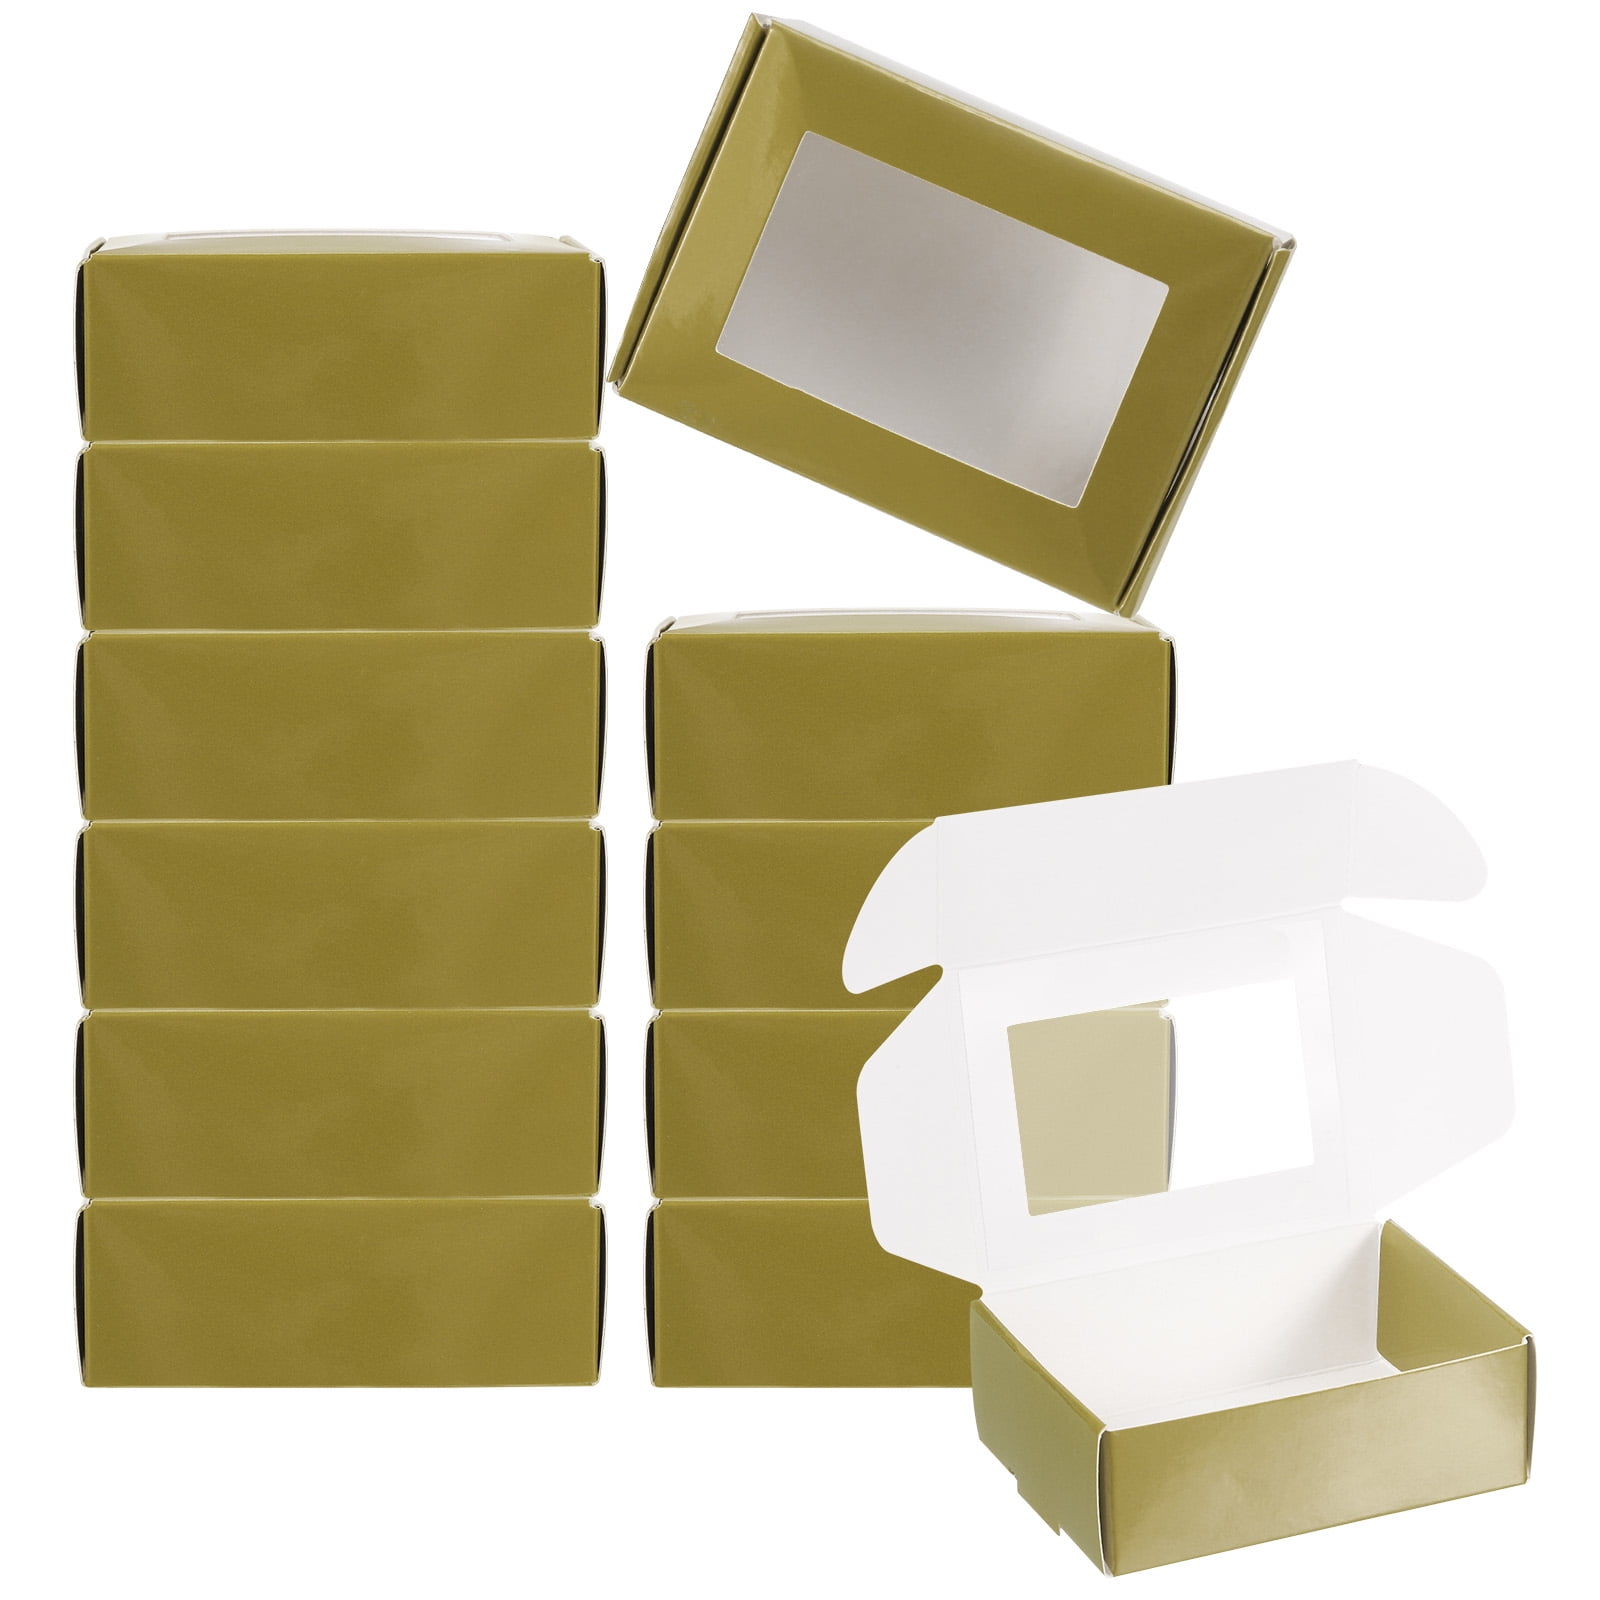 Uxcell 3x3x1.5 Paper Soap Box with Window Homemade Soap Boxes Square  Presents Packaging Boxes, Brown 30 Pack